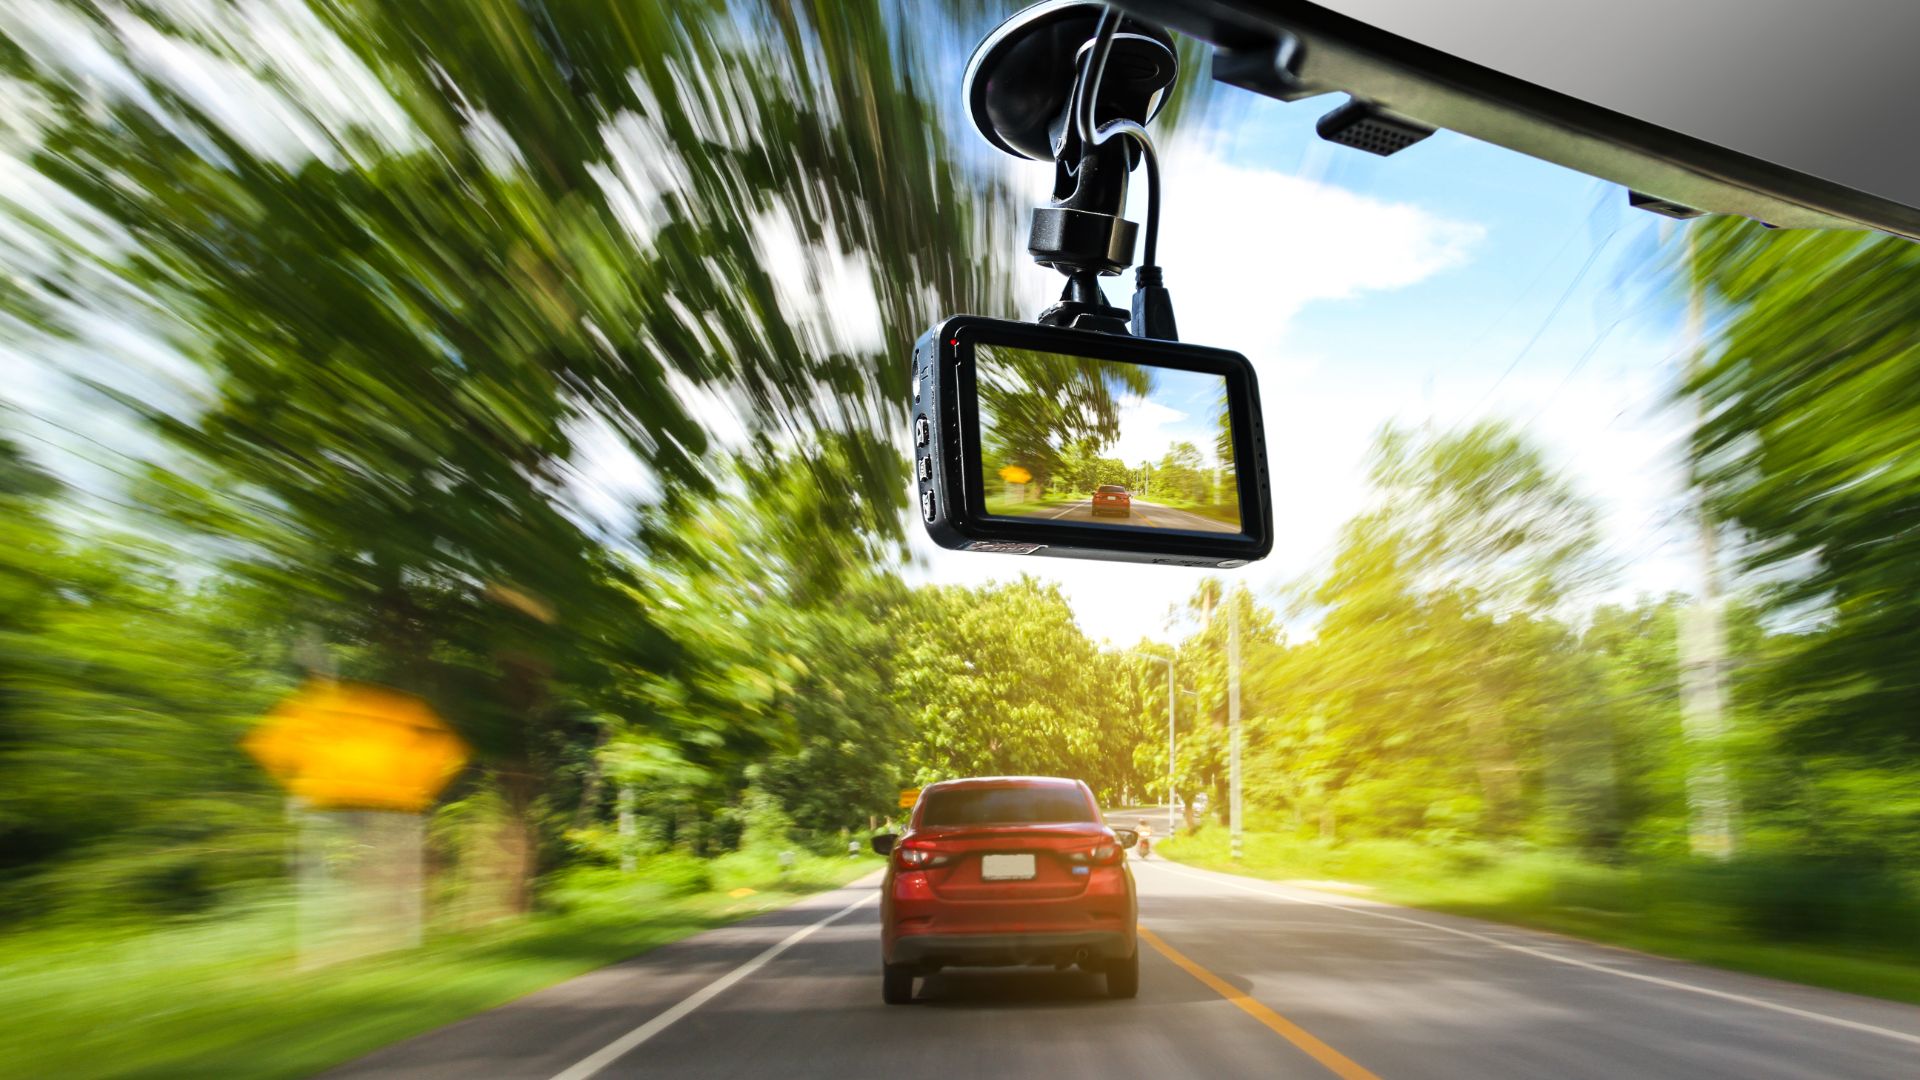 dash cams help police convict dangerous drivers